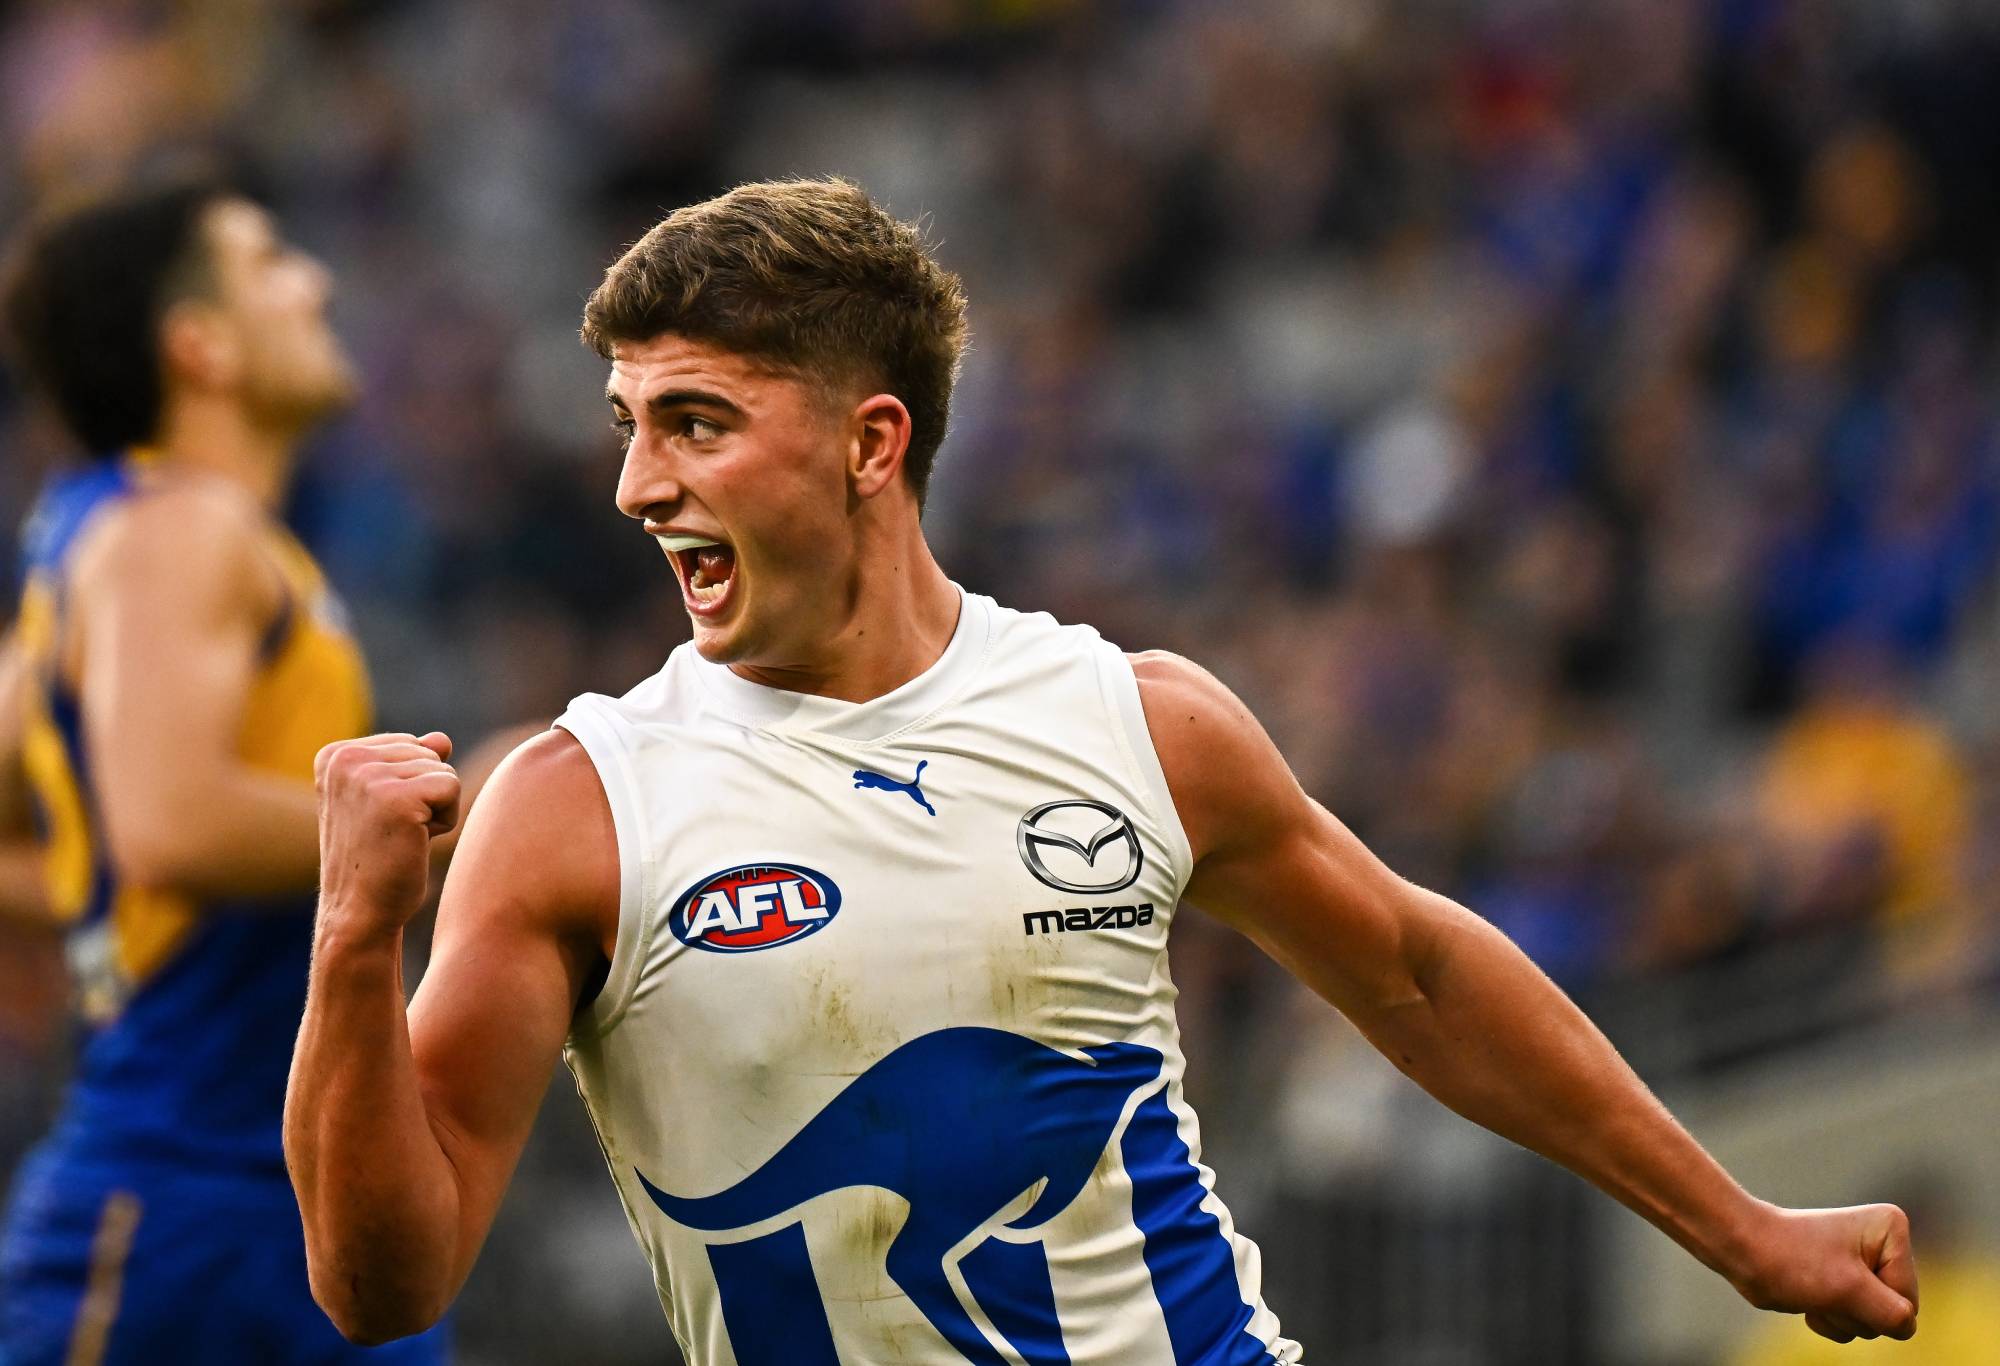 PERTH, AUSTRALIA - JULY 30: Harry Sheezel celebrates a goal during the 2023 AFL Round 20 match between the West Coast Eagles and the North Melbourne Kangaroos at Optus Stadium on July 30, 2023 in Perth, Australia. (Photo by Daniel Carson/AFL Photos via Getty Images)